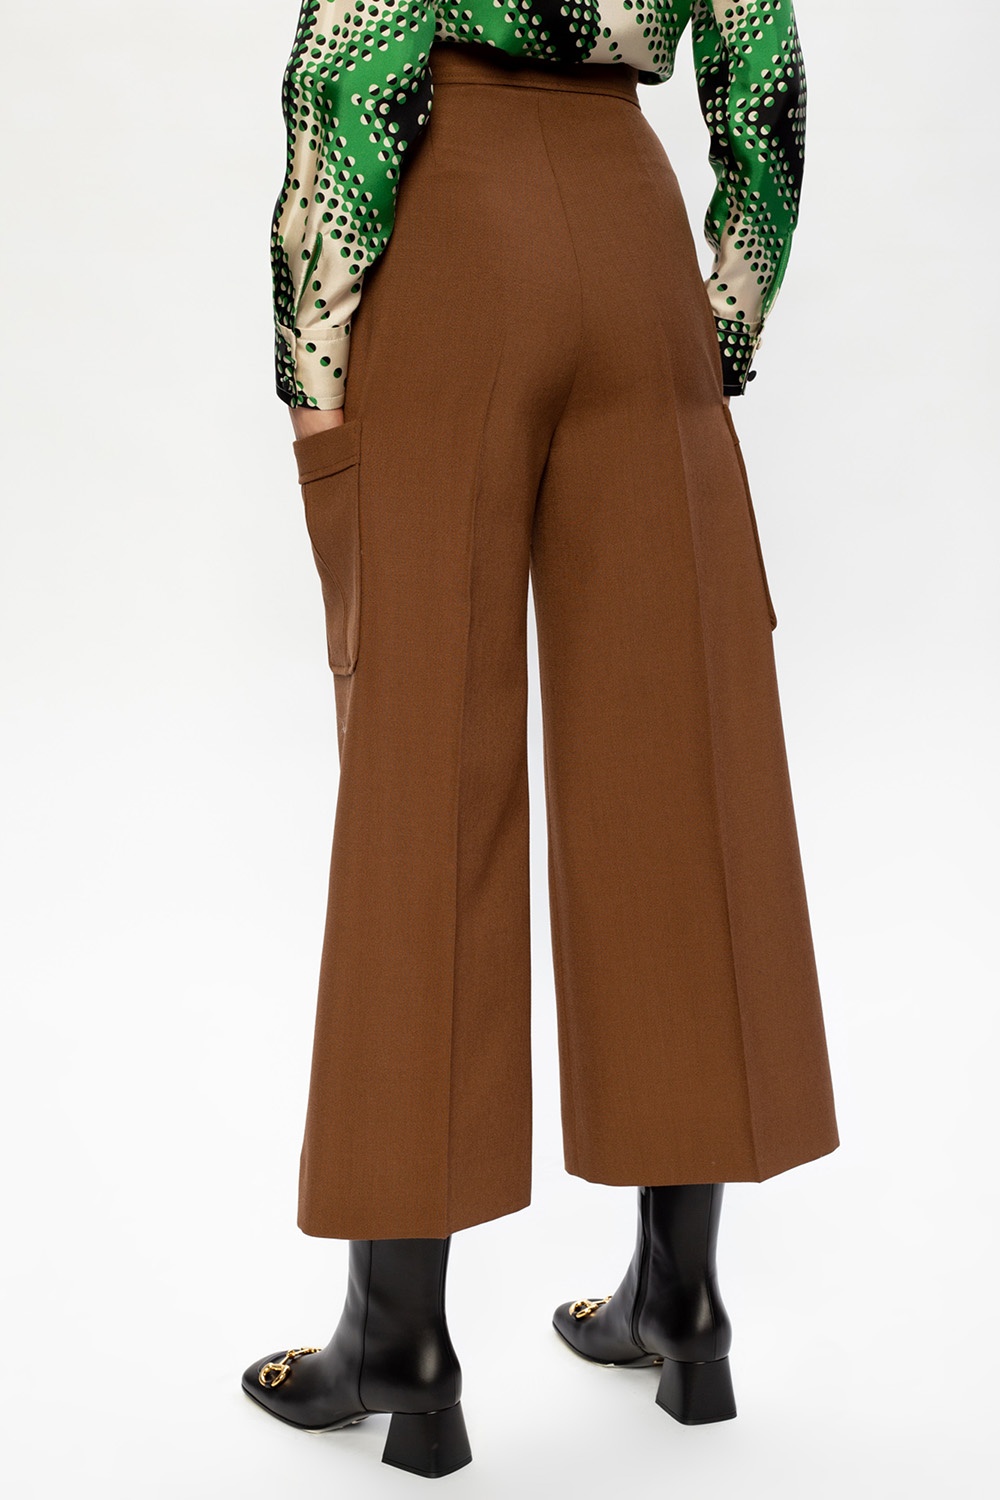 Gucci Floralprint Wideleg Corduroy Cropped Trousers in Brown  Lyst